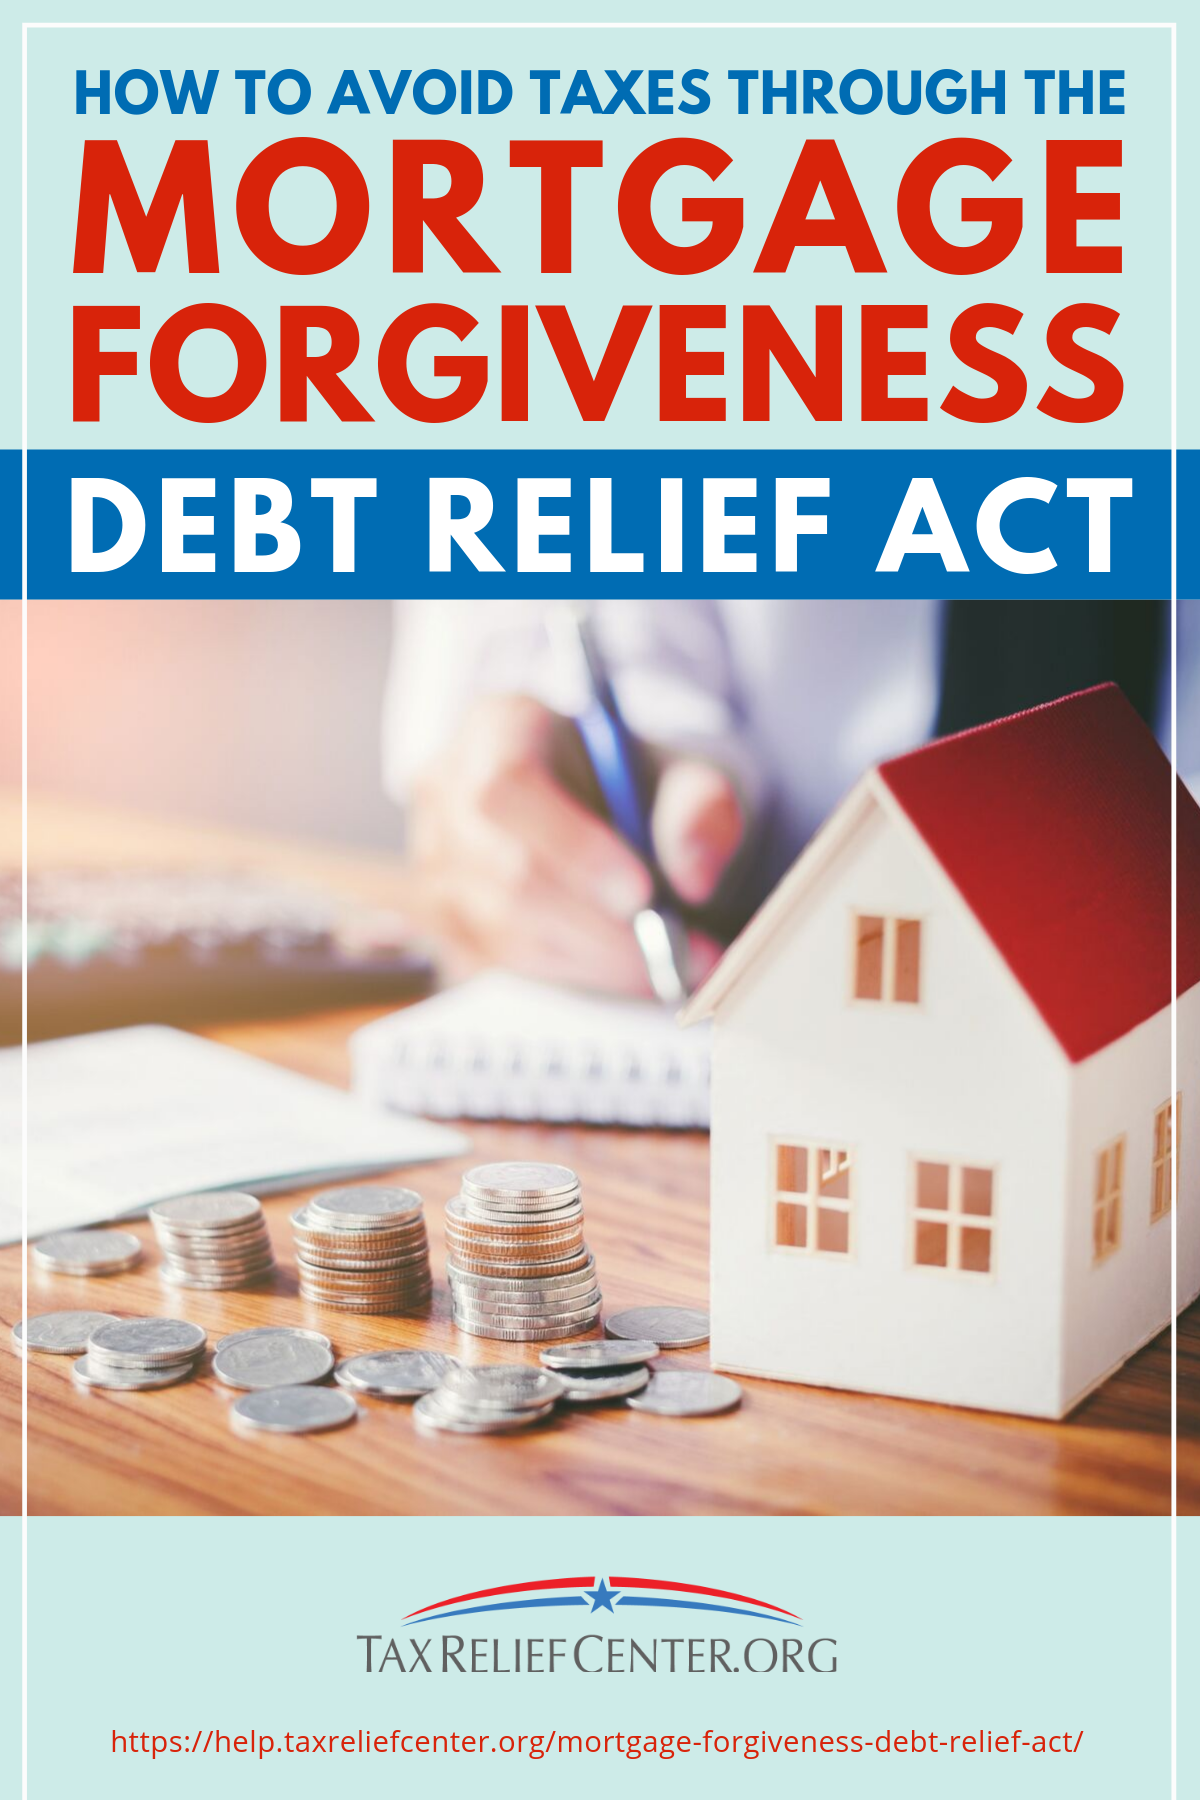 How To Avoid Taxes Through The Mortgage Forgiveness Debt Relief Act https://help.taxreliefcenter.org/mortgage-forgiveness-debt-relief-act/